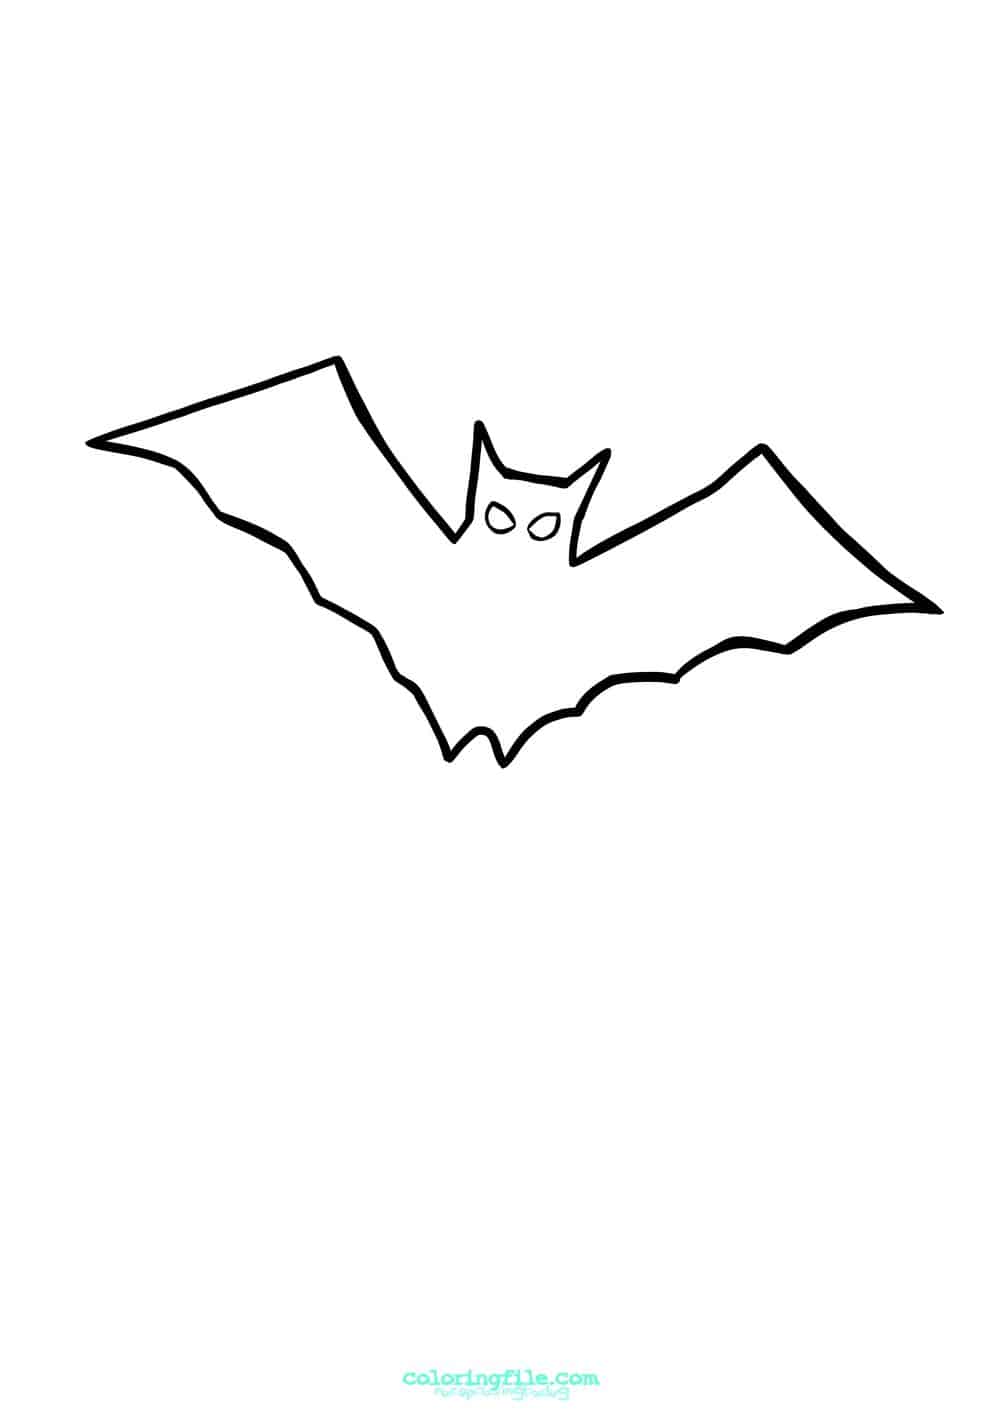 Easy to draw halloween bat coloring pages